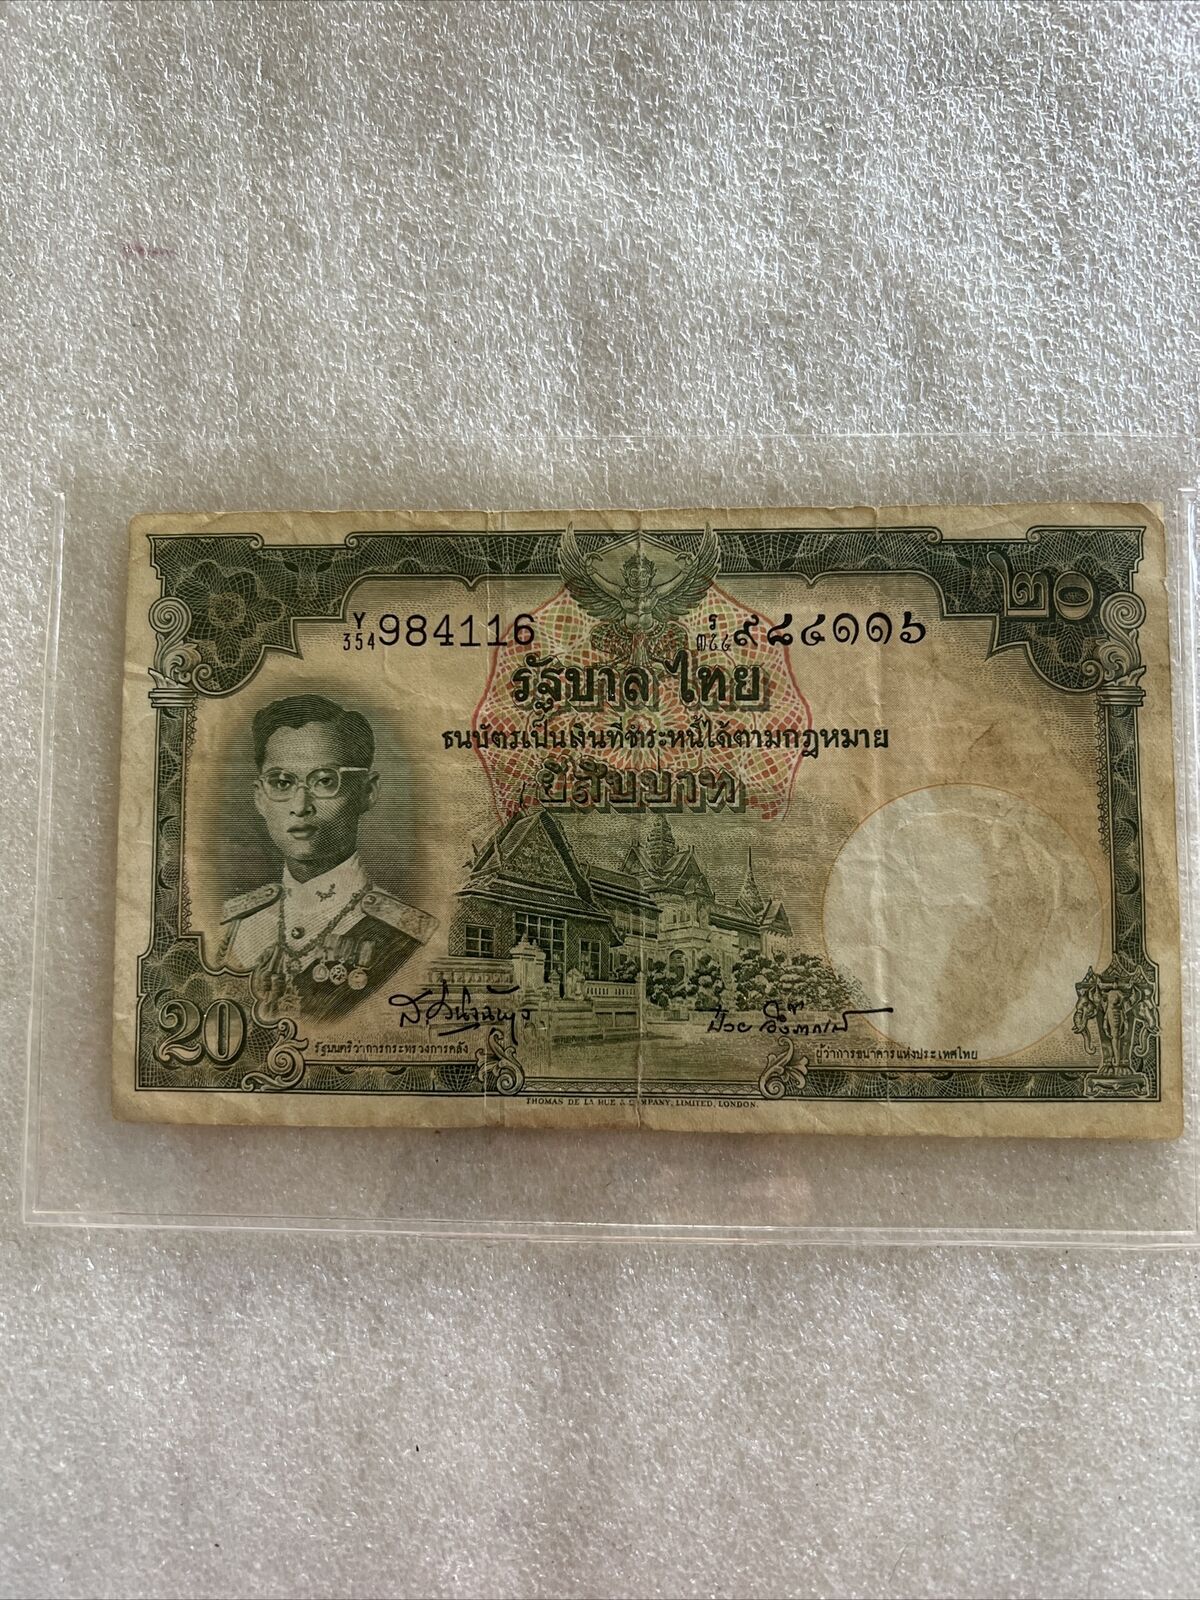 RARE Thailand Banknote 1948-1953? Money 20 Baht : No.984116 In Plastic Covering